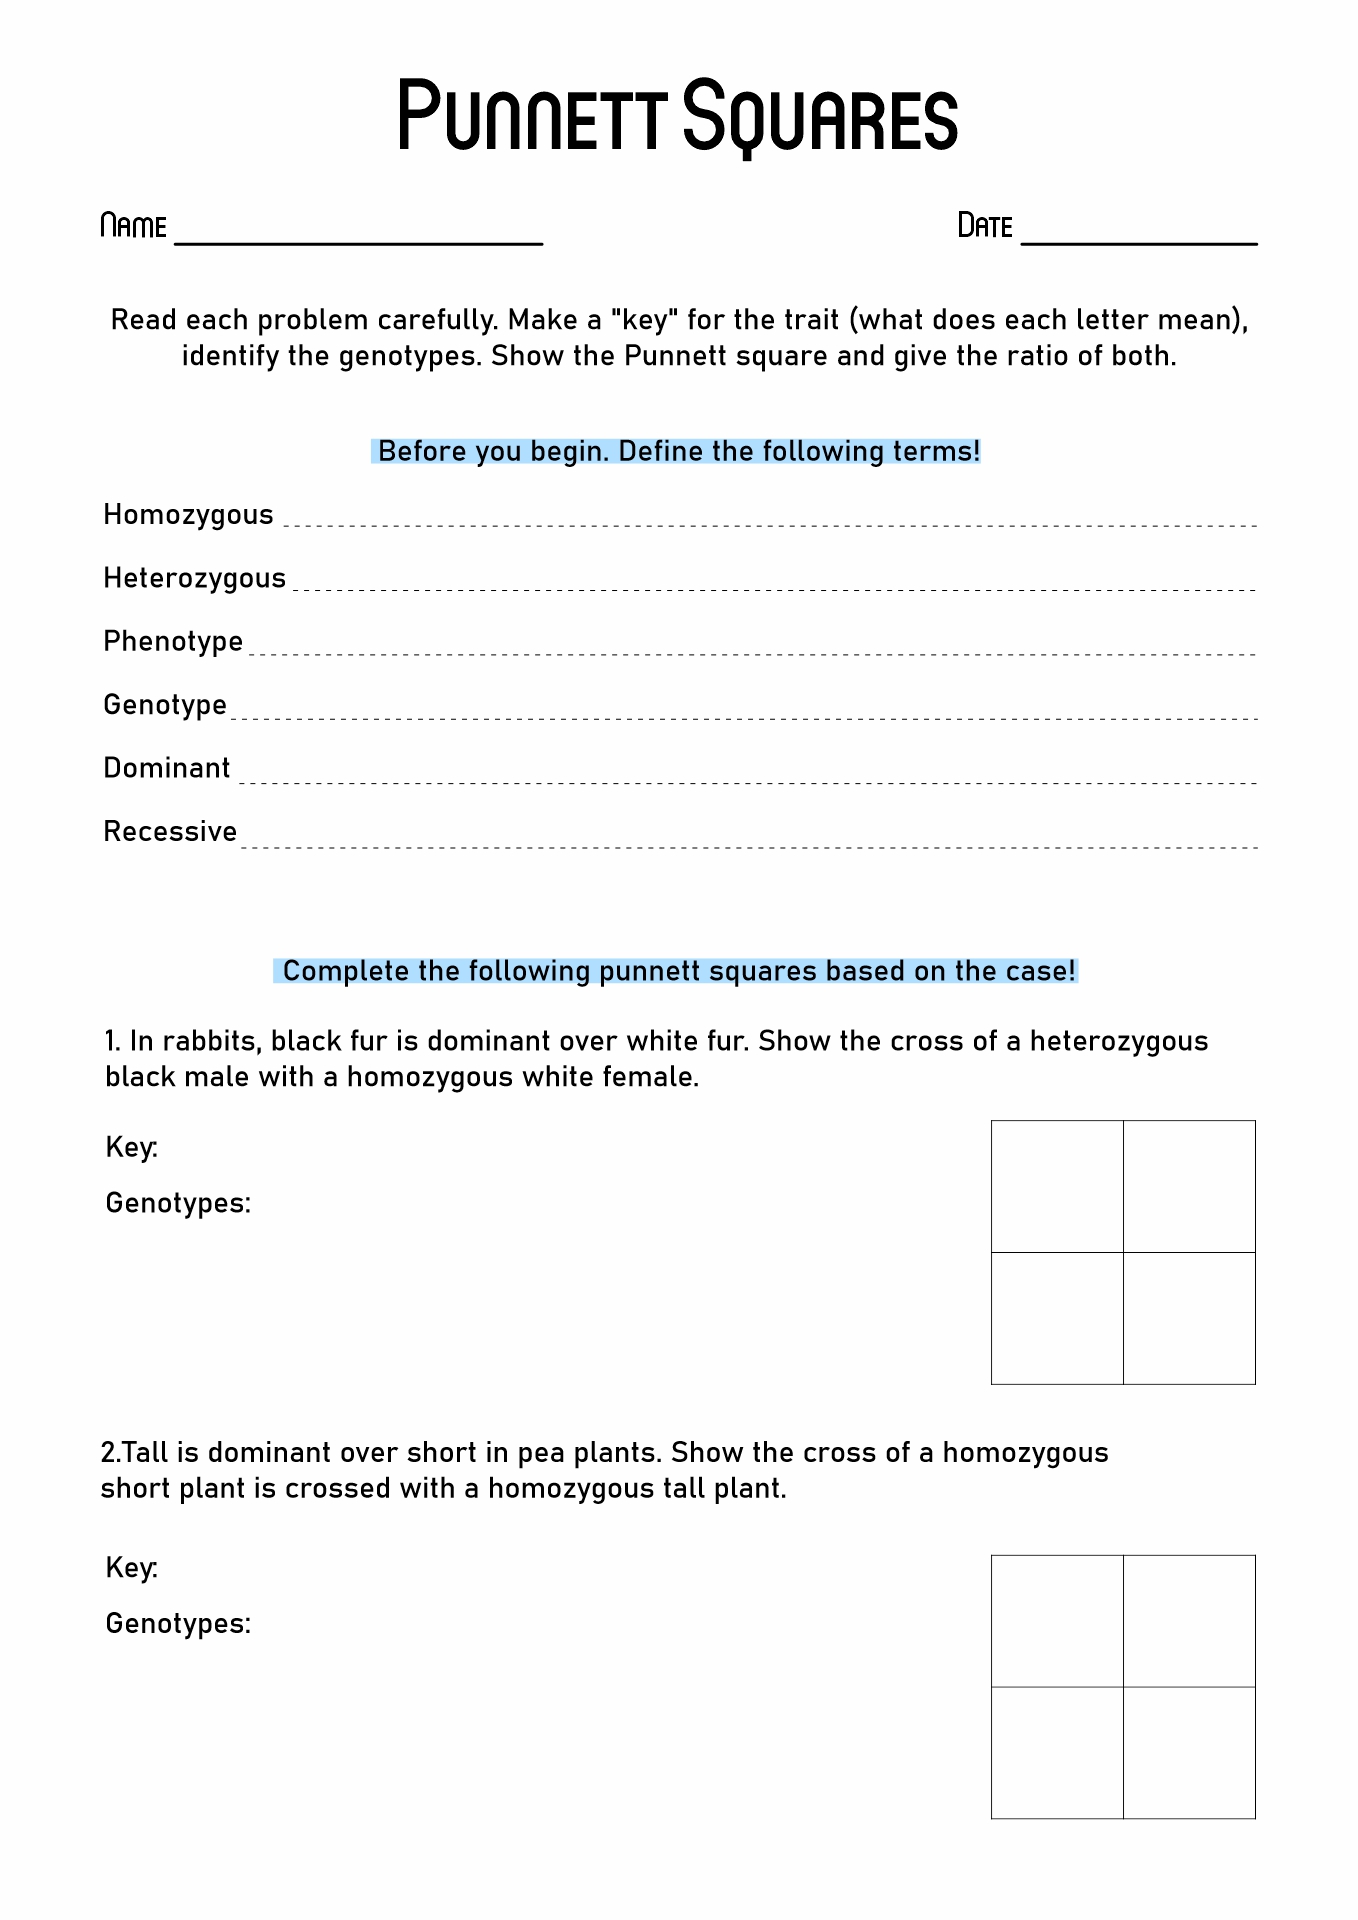 16-best-images-of-blood-type-worksheet-answer-key-worksheet-template-tips-and-reviews